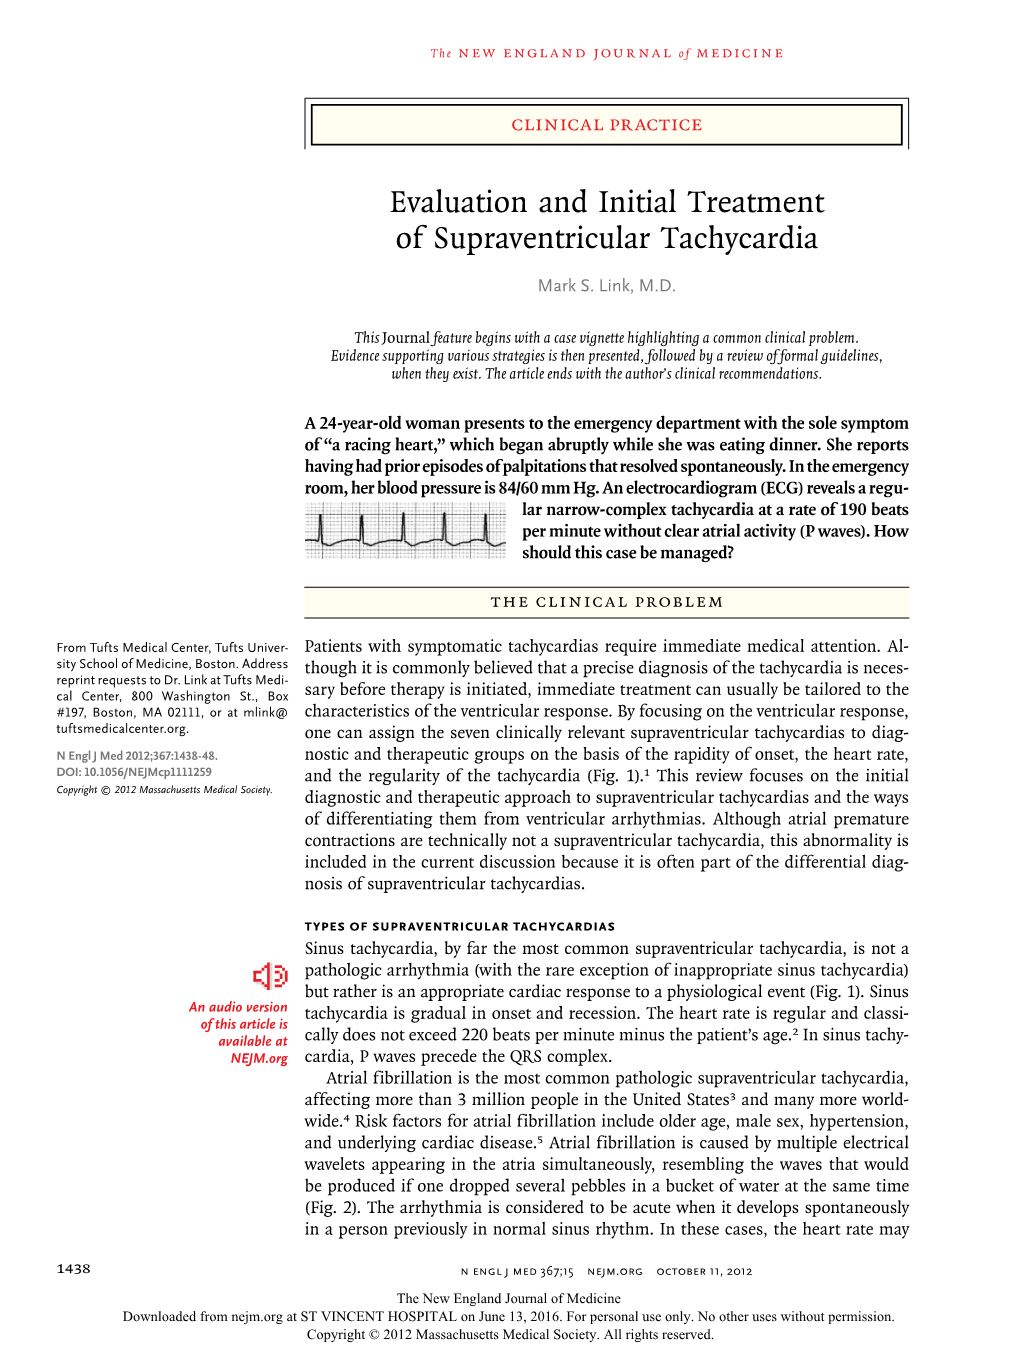 Evaluation and Initial Treatment of Supraventricular Tachycardia